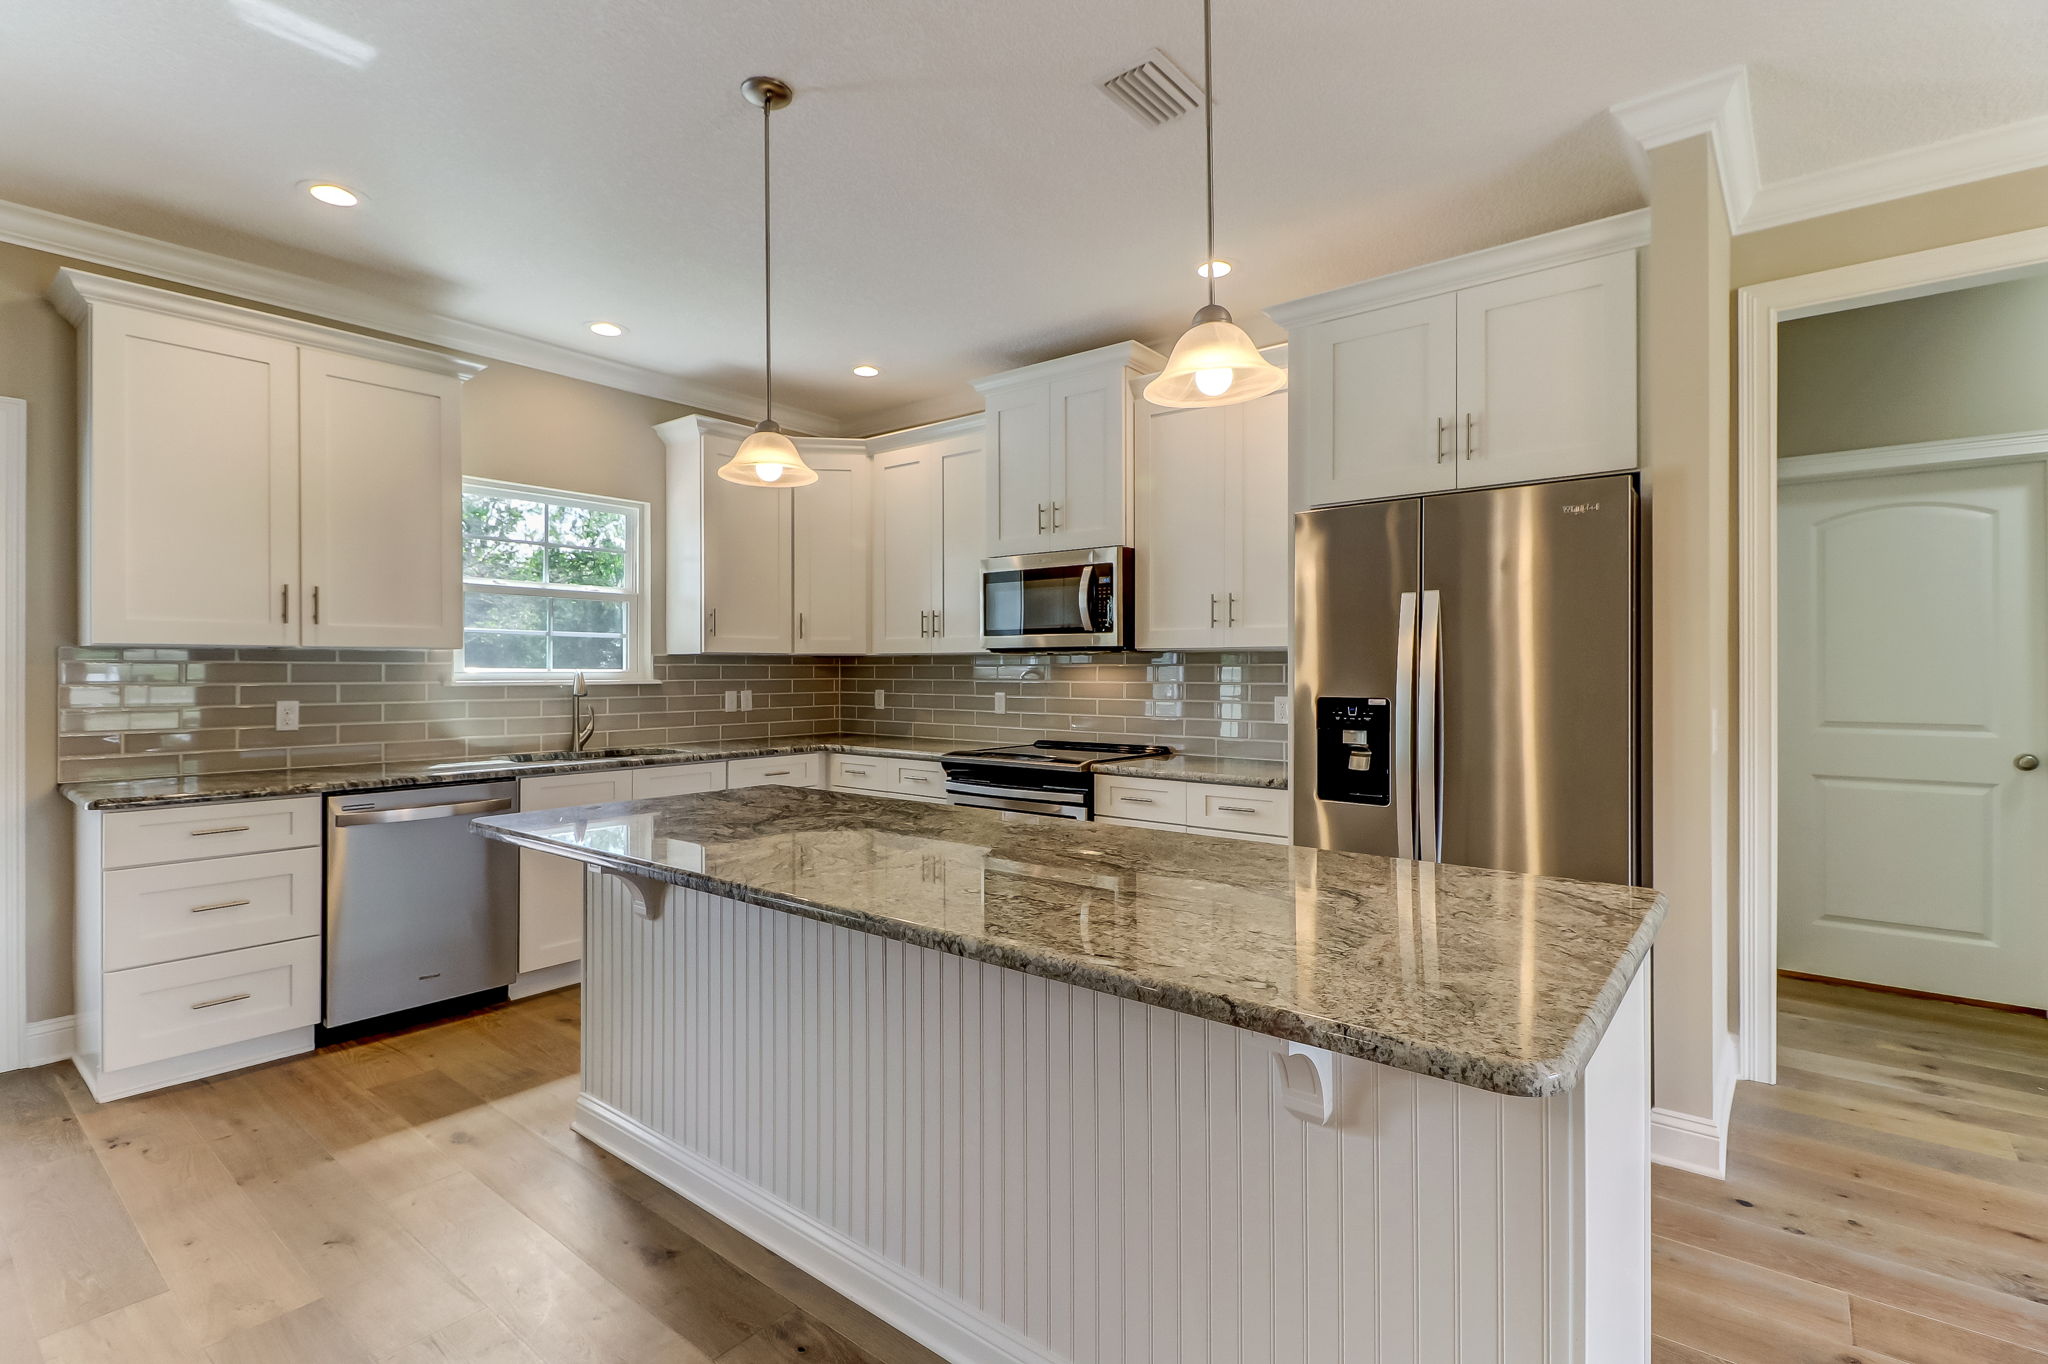 The kitchen is bright and elegant with granite countertops and island, 42' soft close cabinets, and Whirlpool appliances.